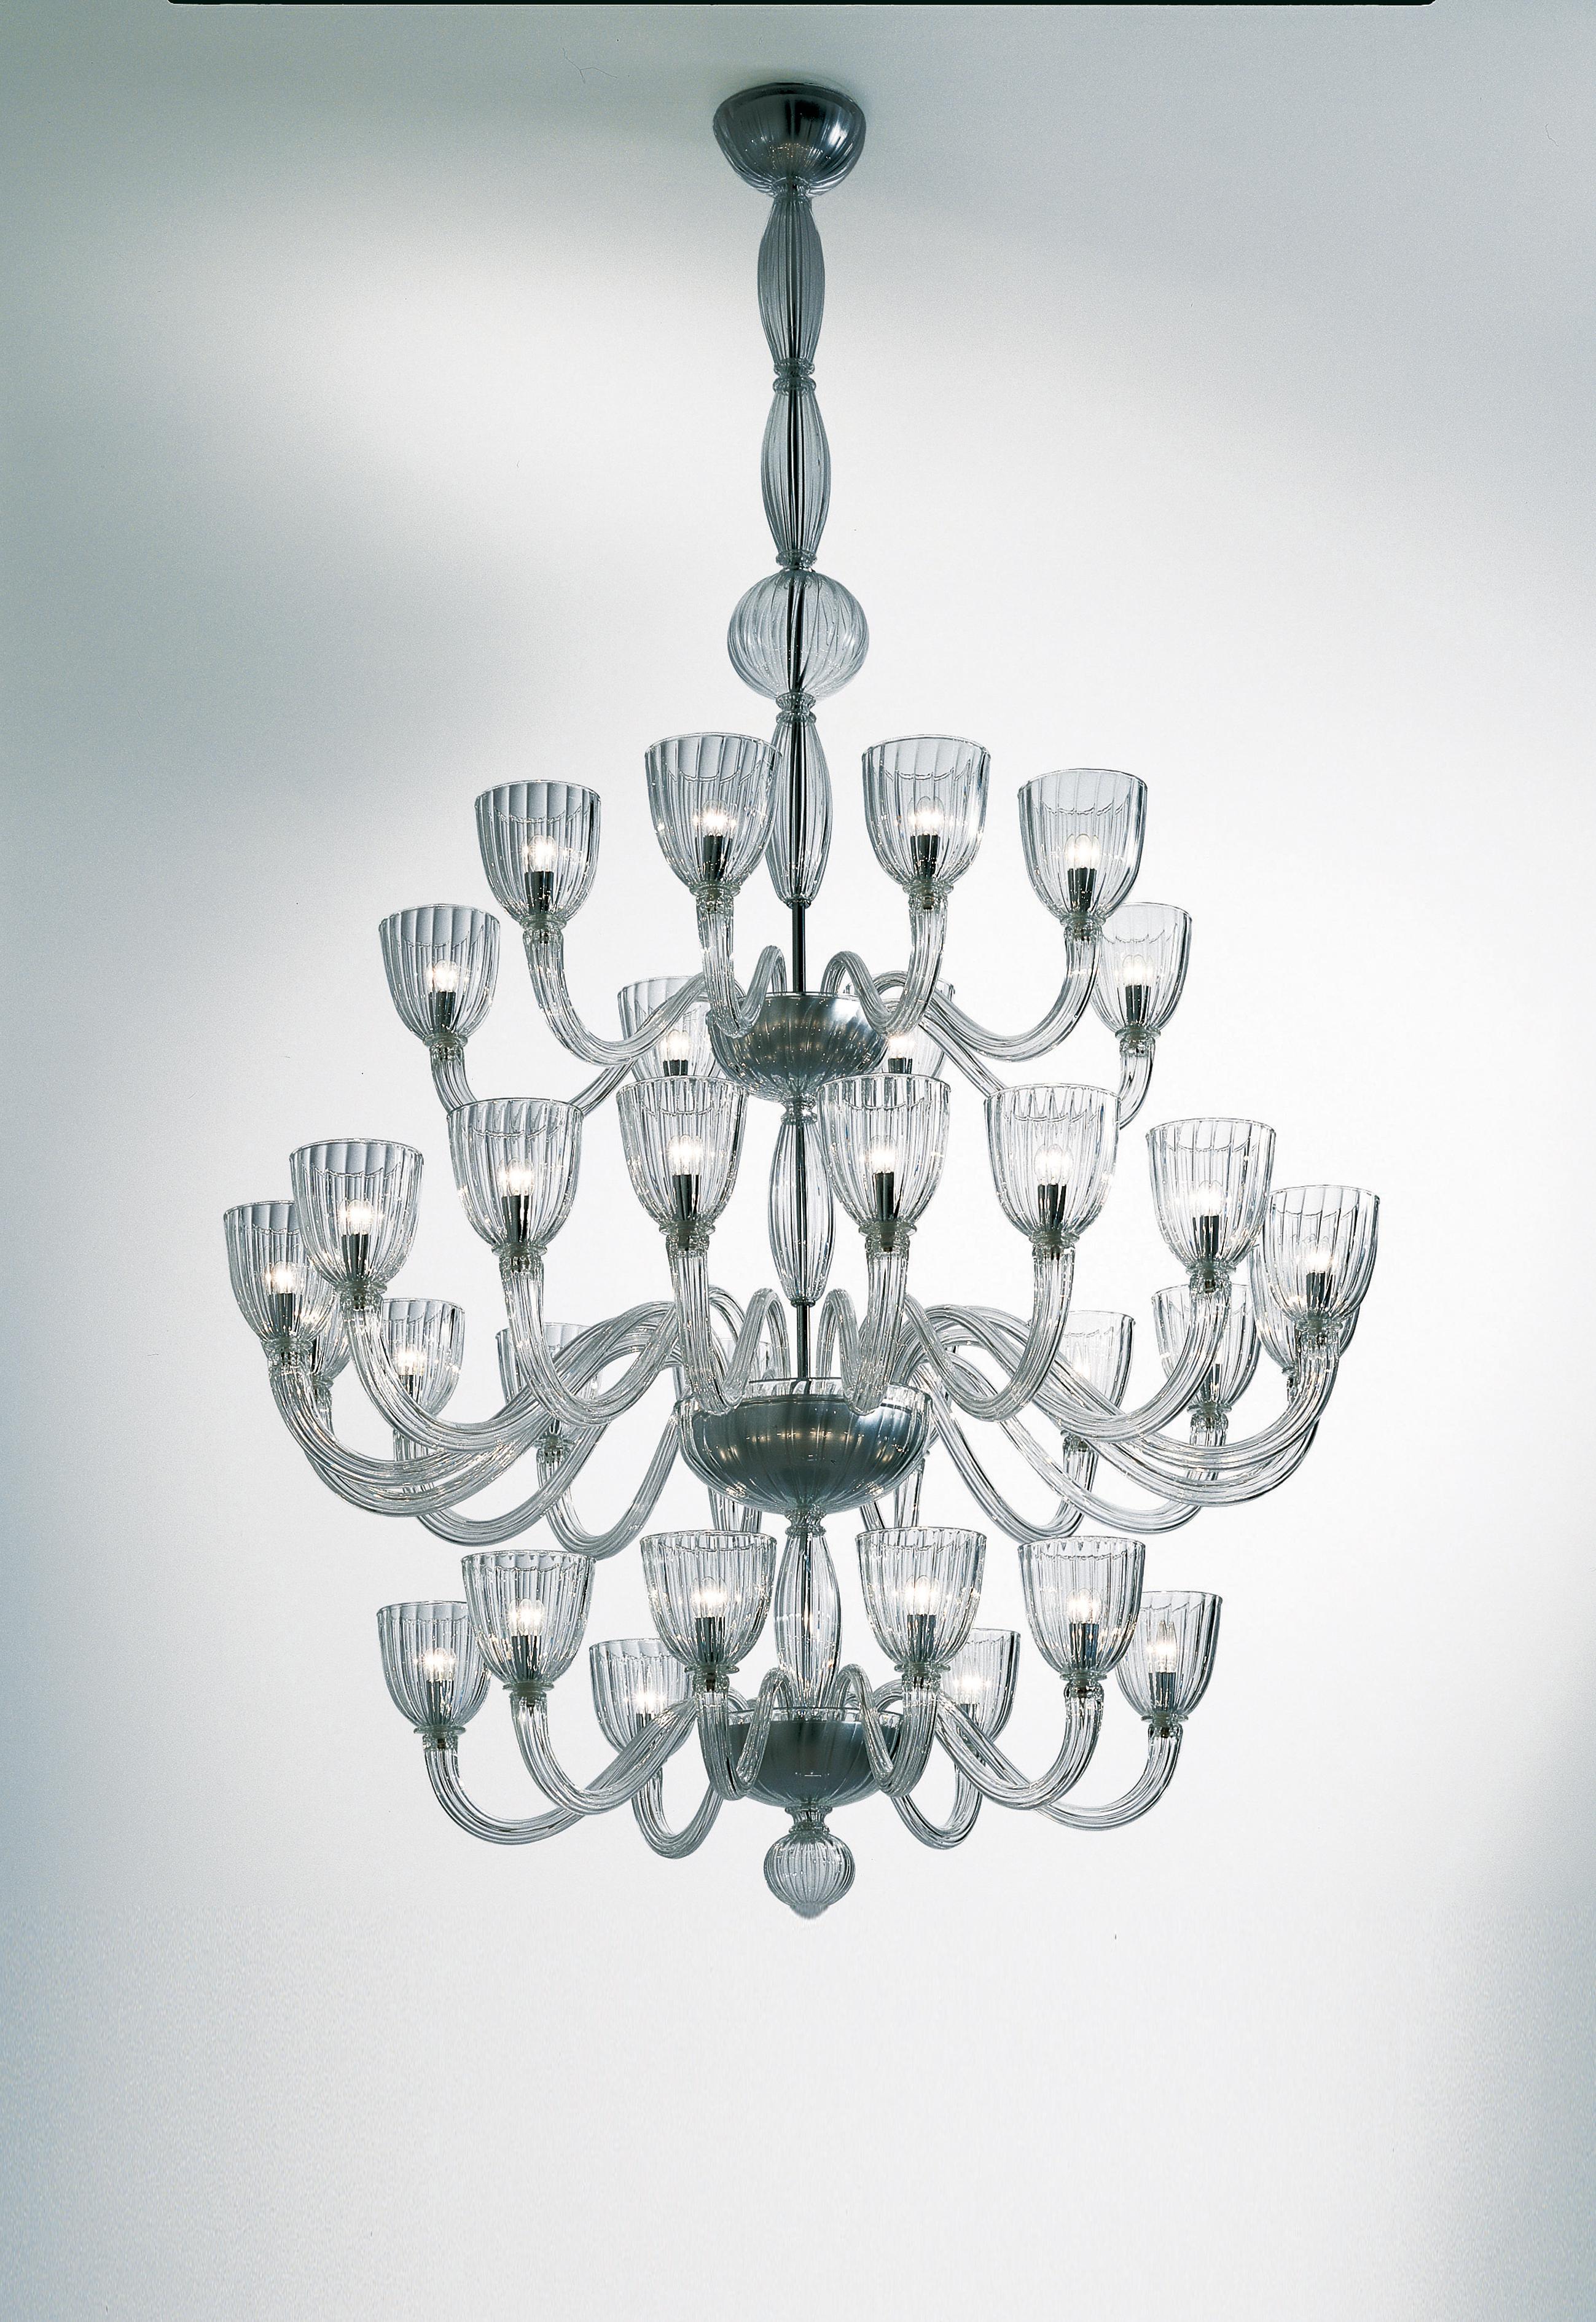 Chandelier in handmade blown glass with chromium plated metal finishes. Its size and shape make it an elegant and large statement to any room. 

Light source: 32 lights x max 60 W E14. Dimensions: 143 cm diameter x 233 cm height.